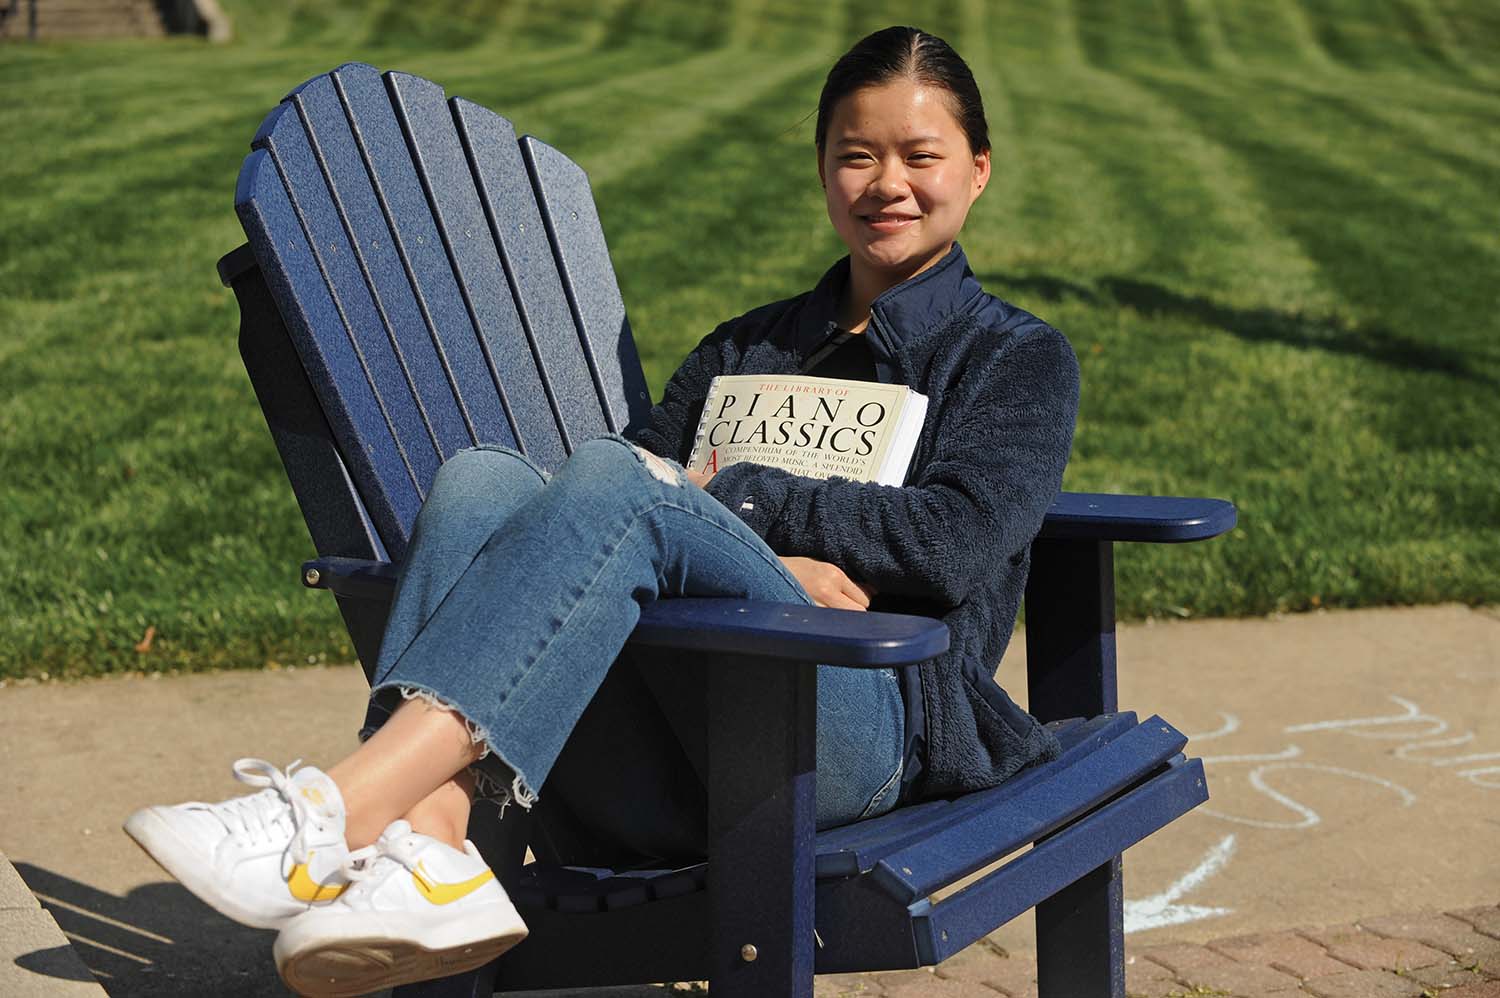 Marietta College student Sarah McNeer sits in a blue chair holding a booked titled Piano Classics